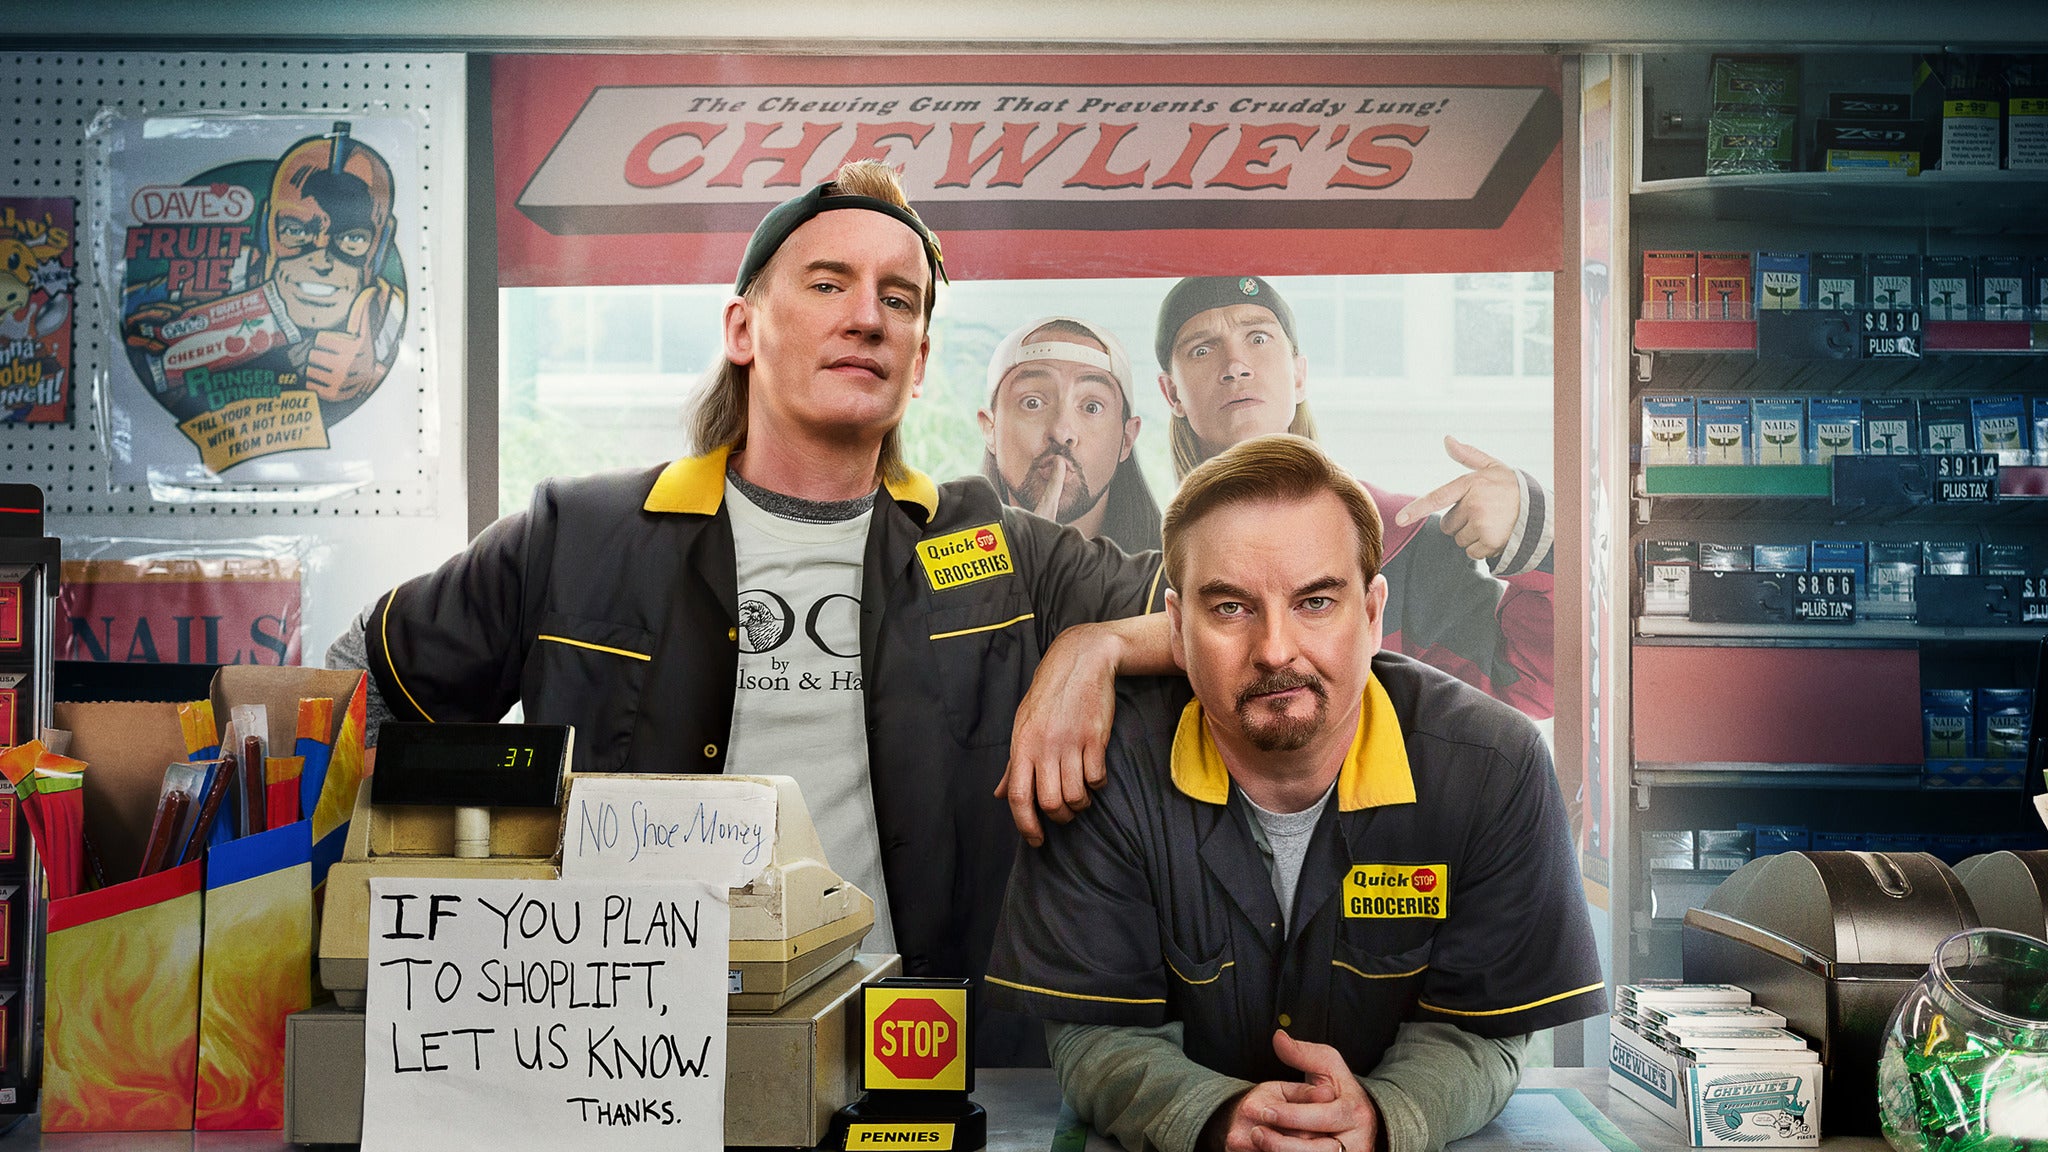 Clerks III: The Convenience Tour with Kevin Smith presale code for early tickets in Montreal